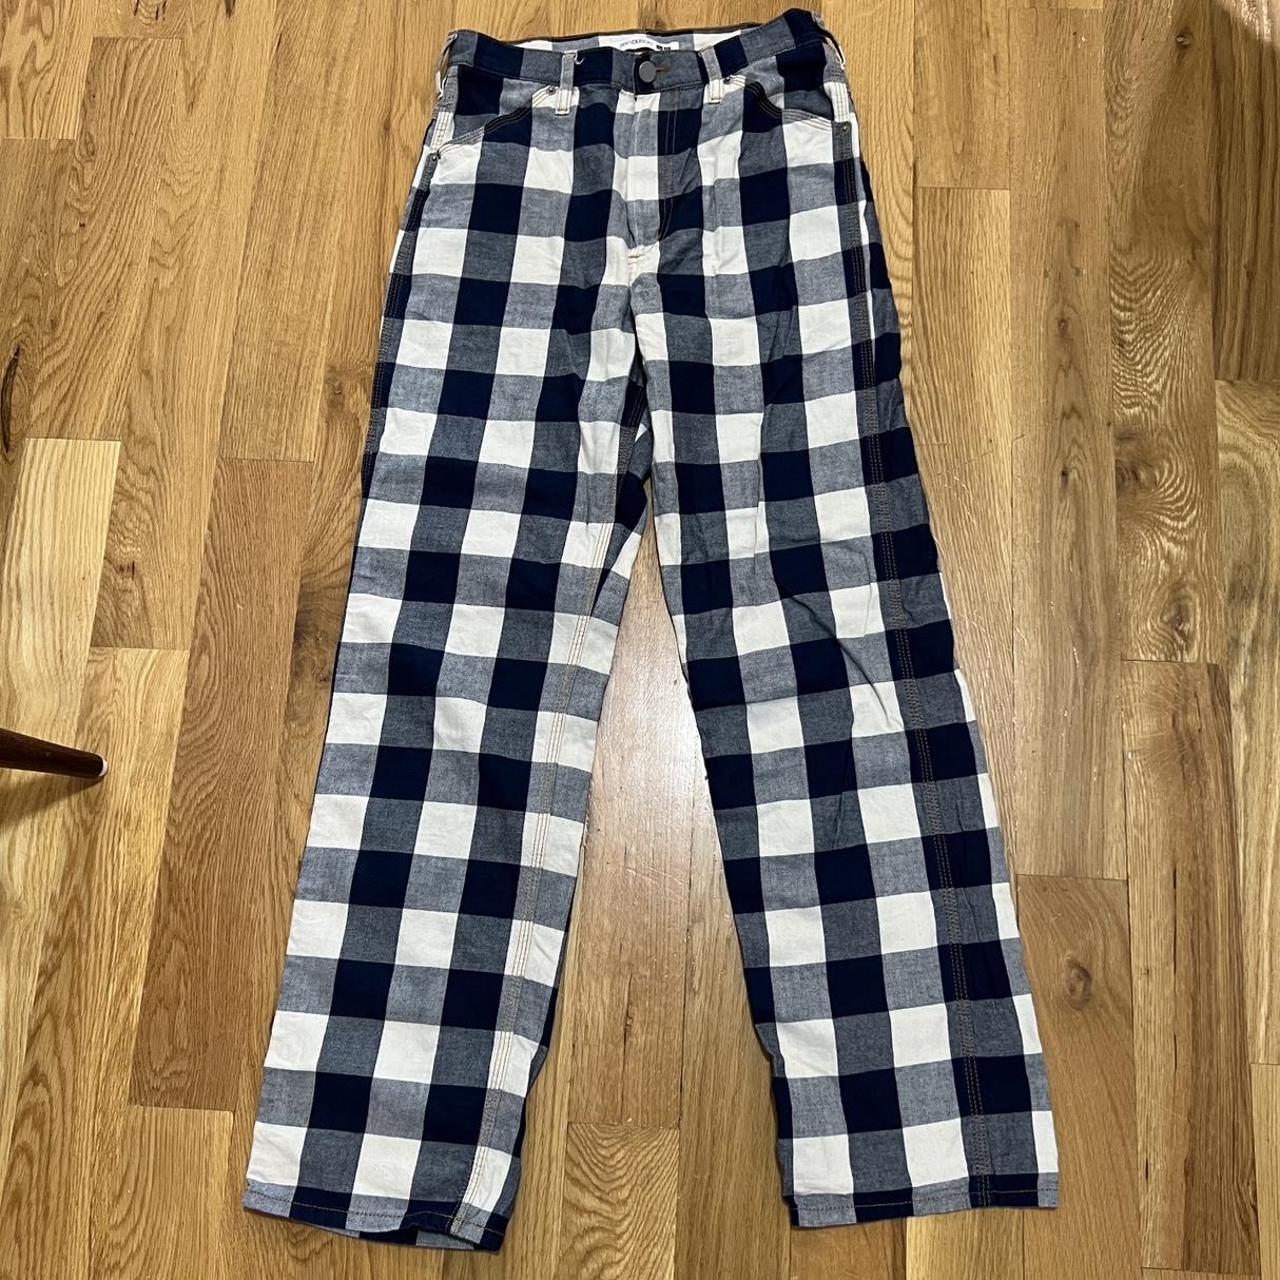 JW Anderson Women's Navy and White Trousers | Depop